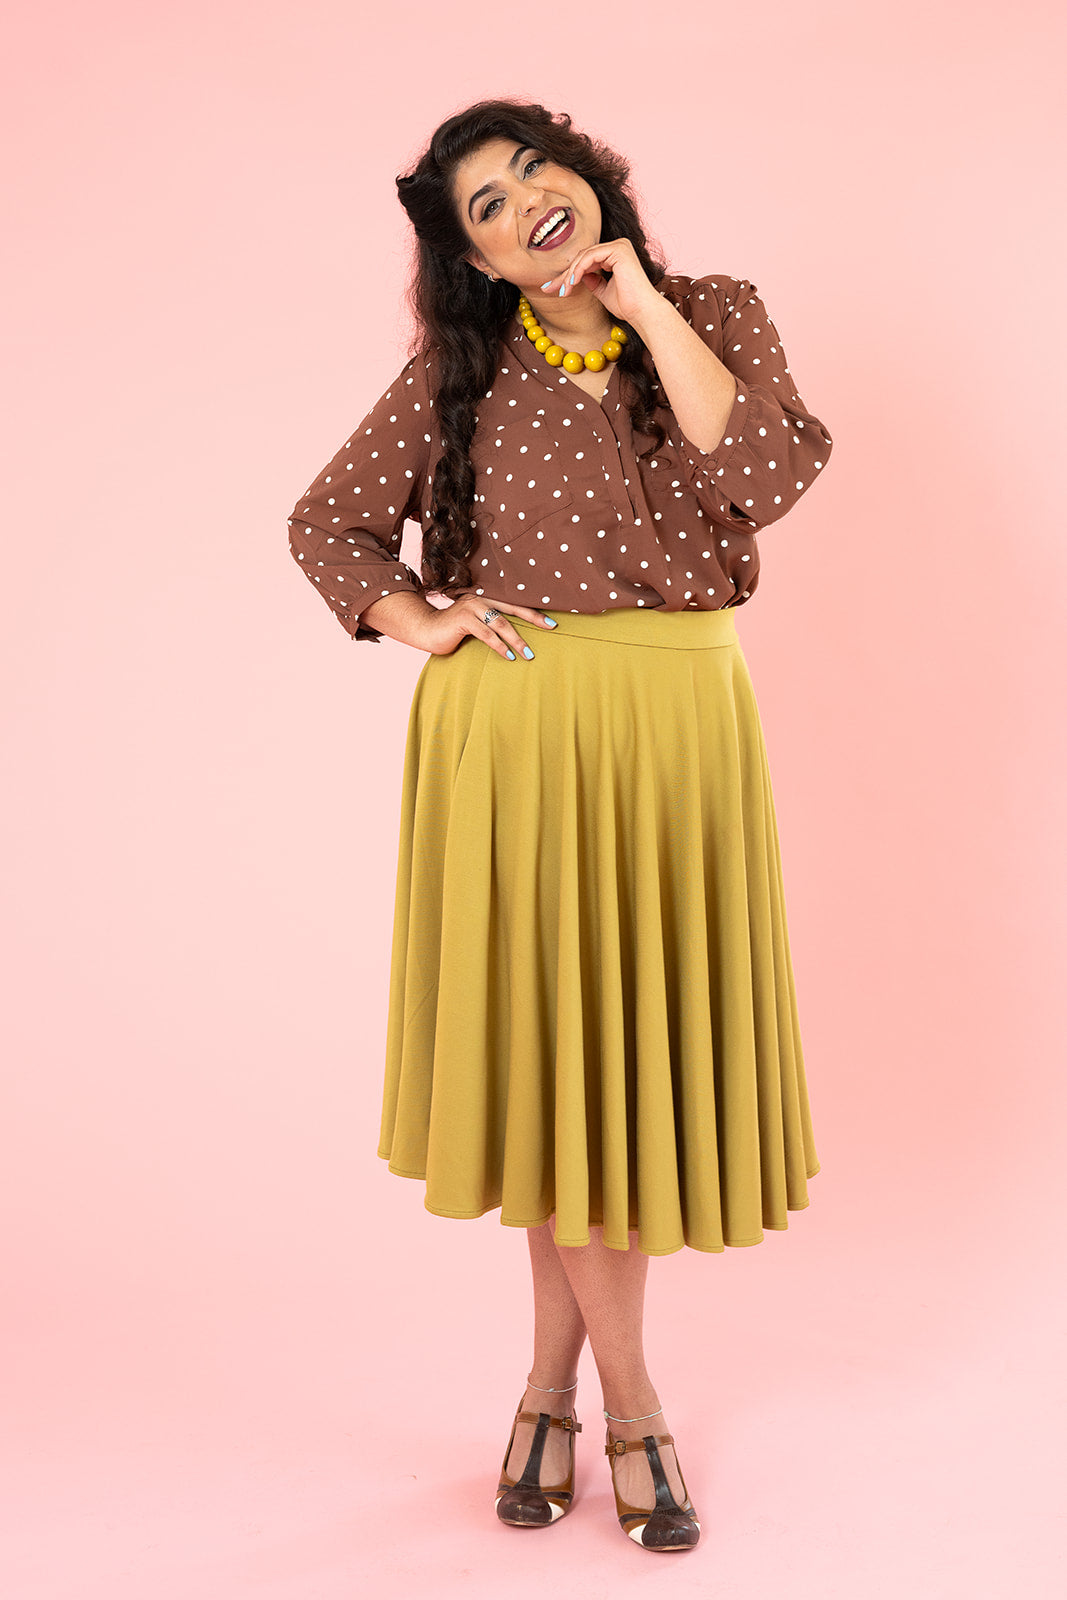 A woman with dark brown hair is looking at the camera and smiling. She is wearing a mustard coloured skirt and a brown shirt with polka dots